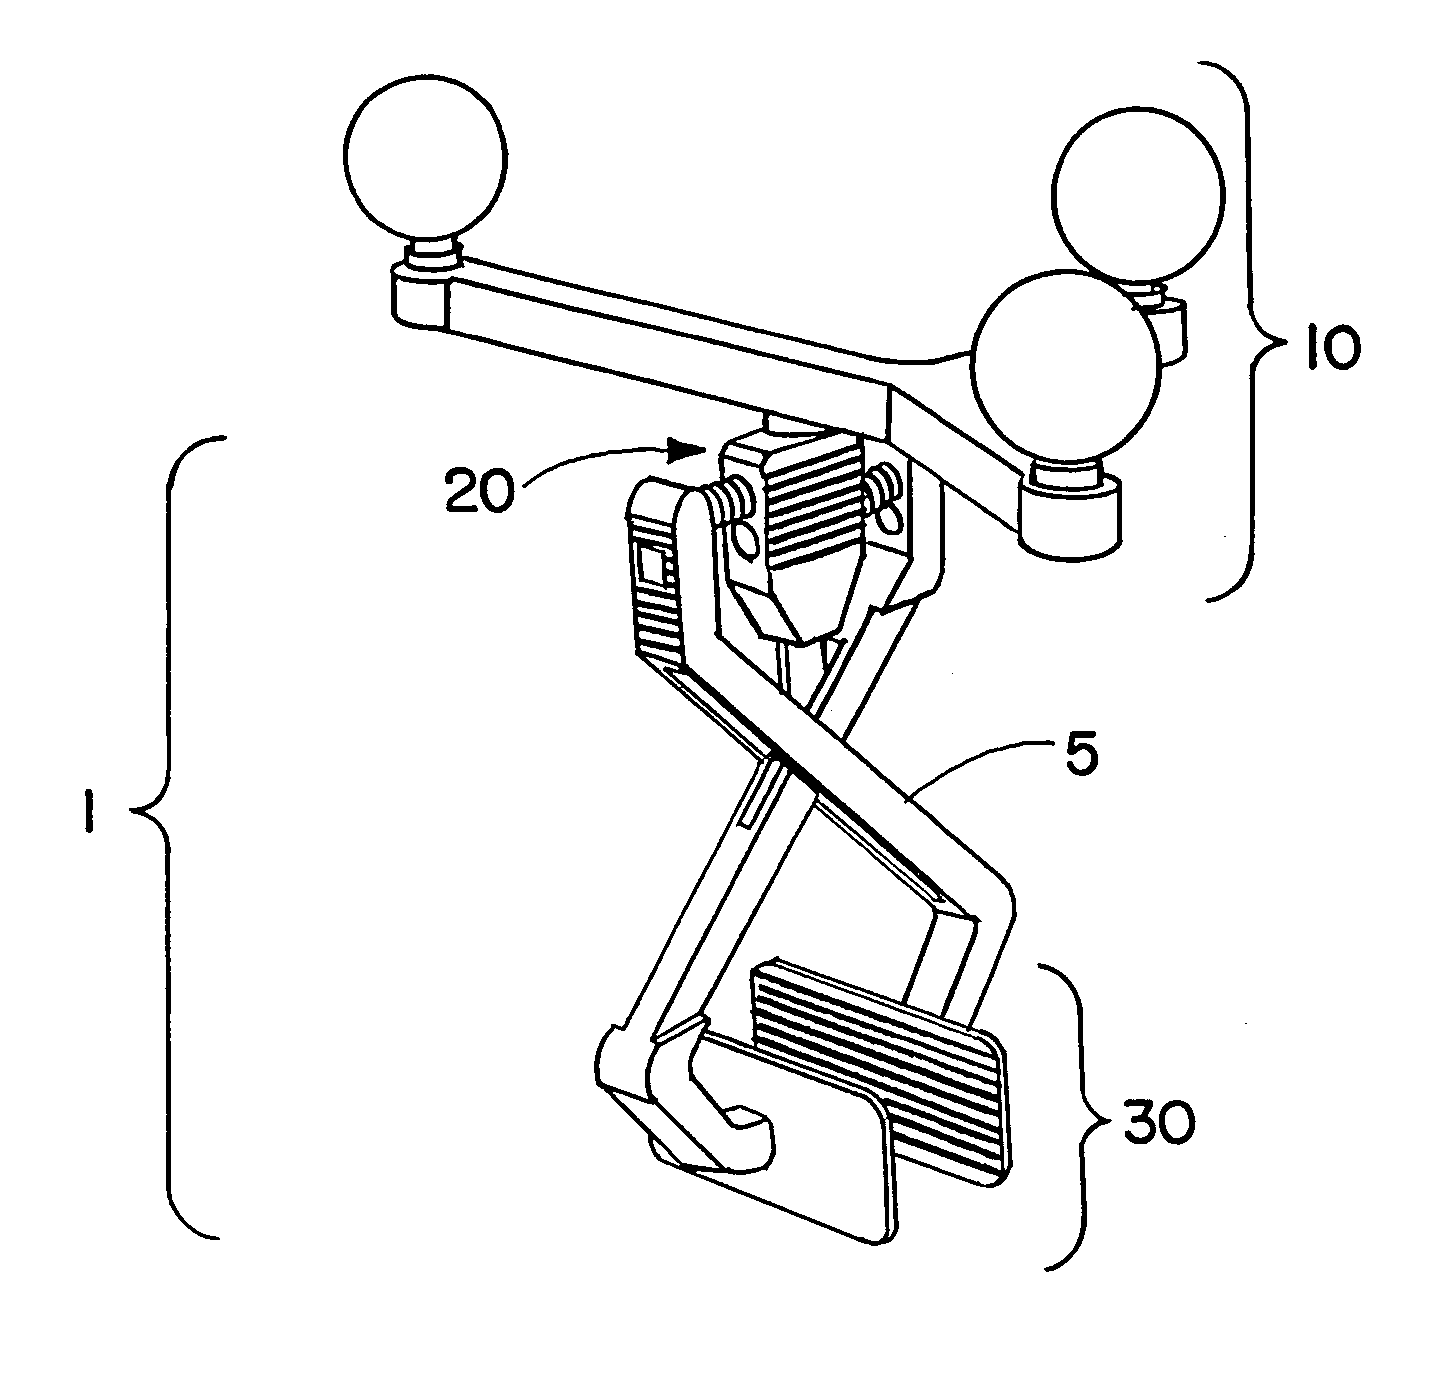 Adaptor for attaching a reference array to a medical instrument having a functional direction or plane